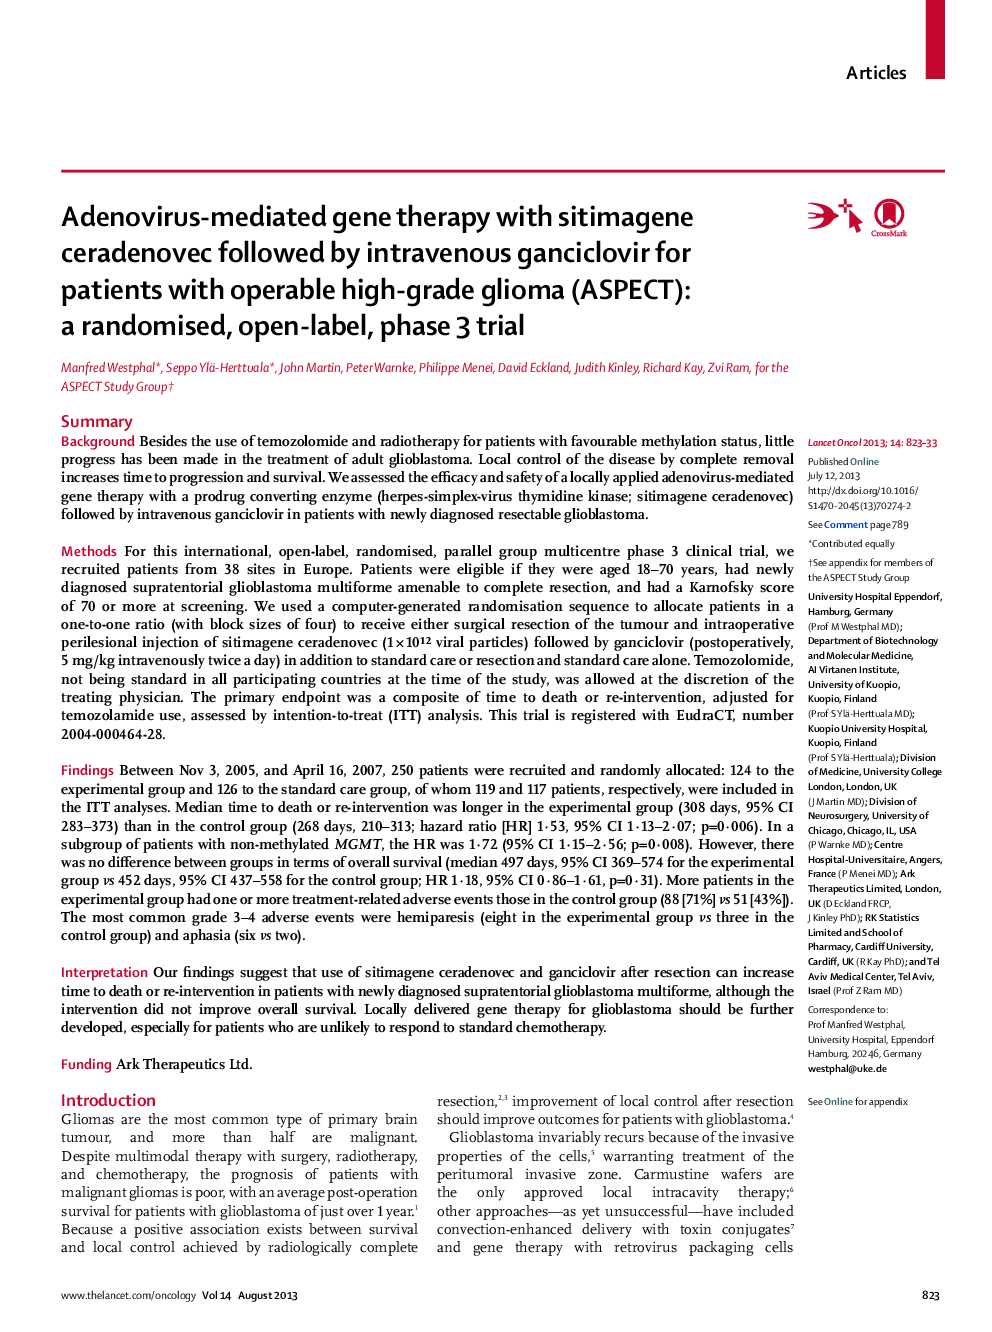 Adenovirus-mediated gene therapy with sitimagene ceradenovec followed by intravenous ganciclovir for patients with operable high-grade glioma (ASPECT): a randomised, open-label, phase 3 trial